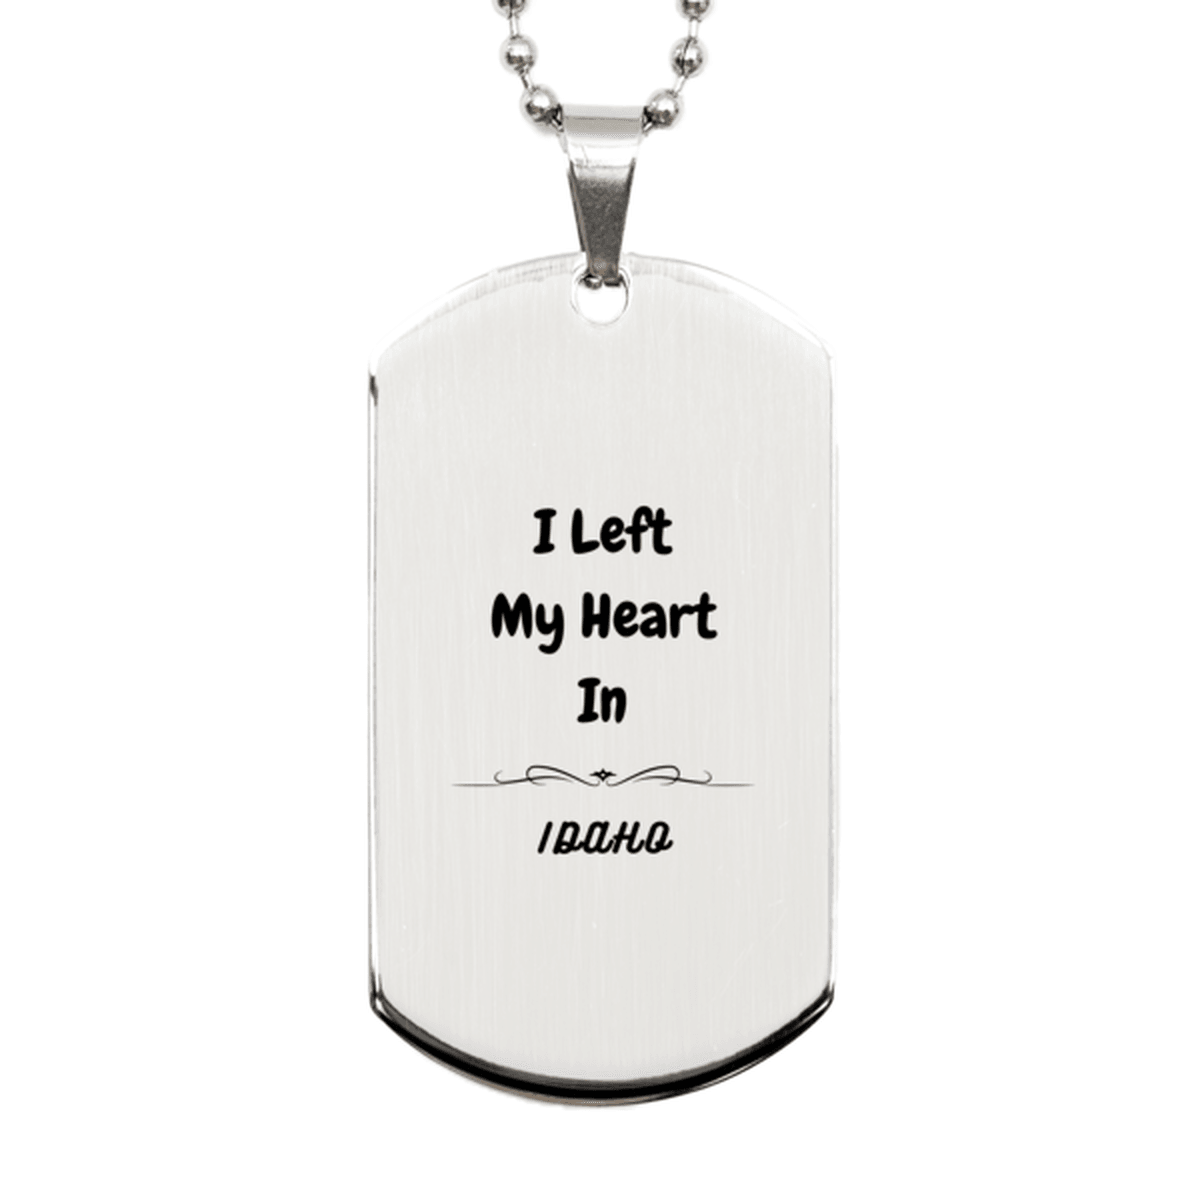 I Left My Heart In Idaho Gifts, Meaningful Idaho State for Friends, Men, Women. Silver Dog Tag for Idaho People - Mallard Moon Gift Shop